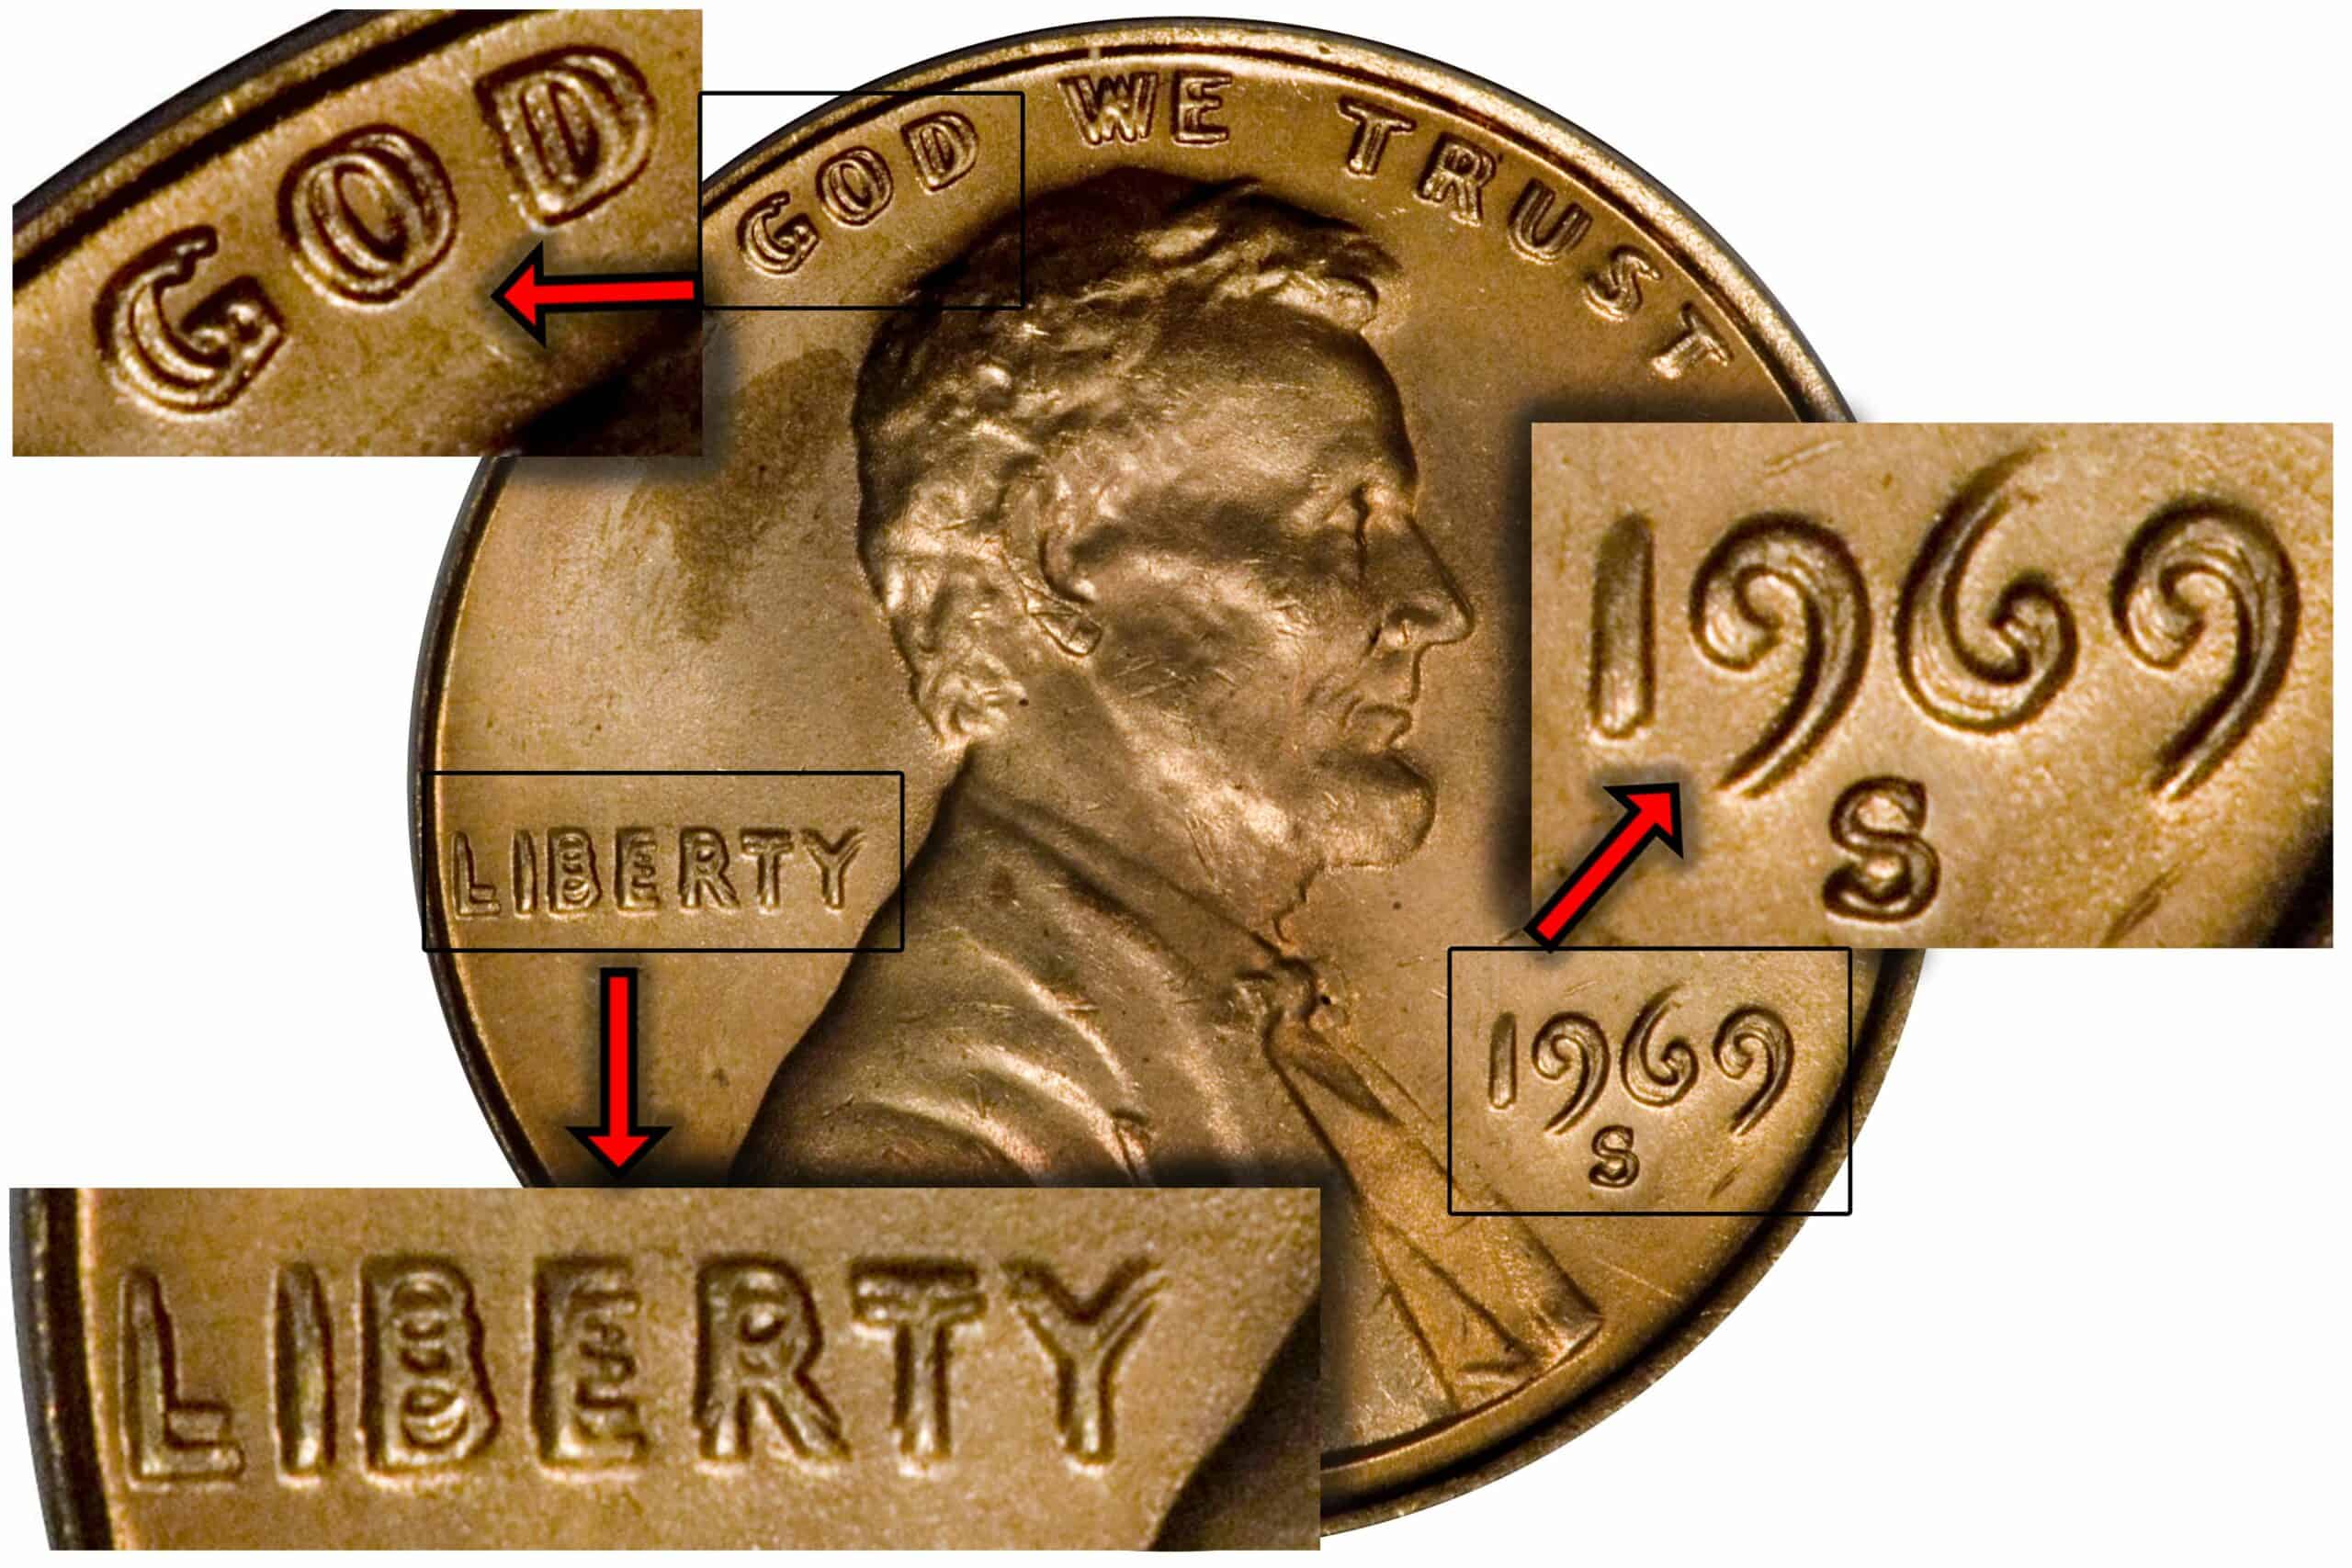 1969 “S” Double Die Error Penny (Reverse and Obverse)